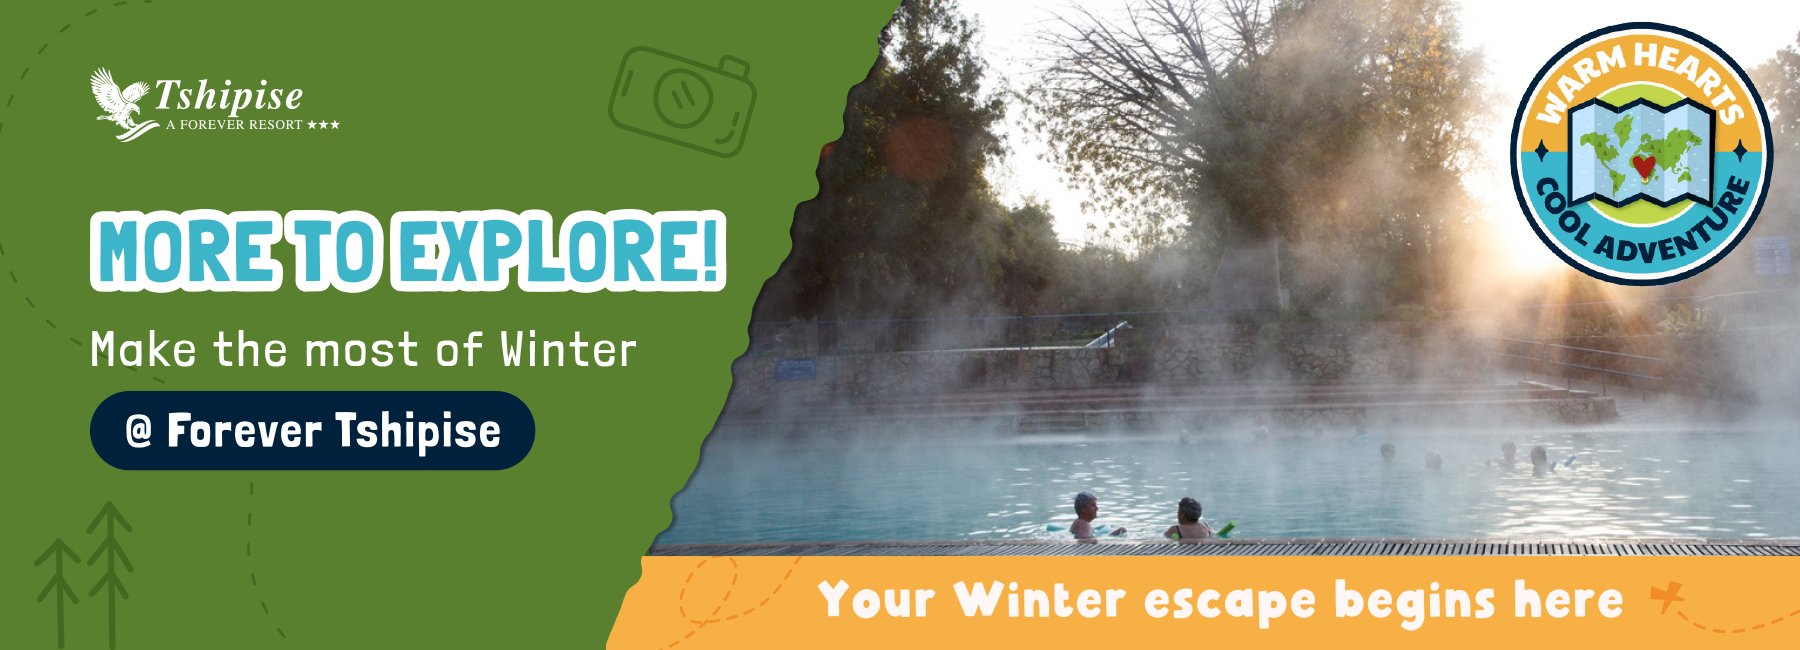 More to explore! Make the most of Winter at Tshipise